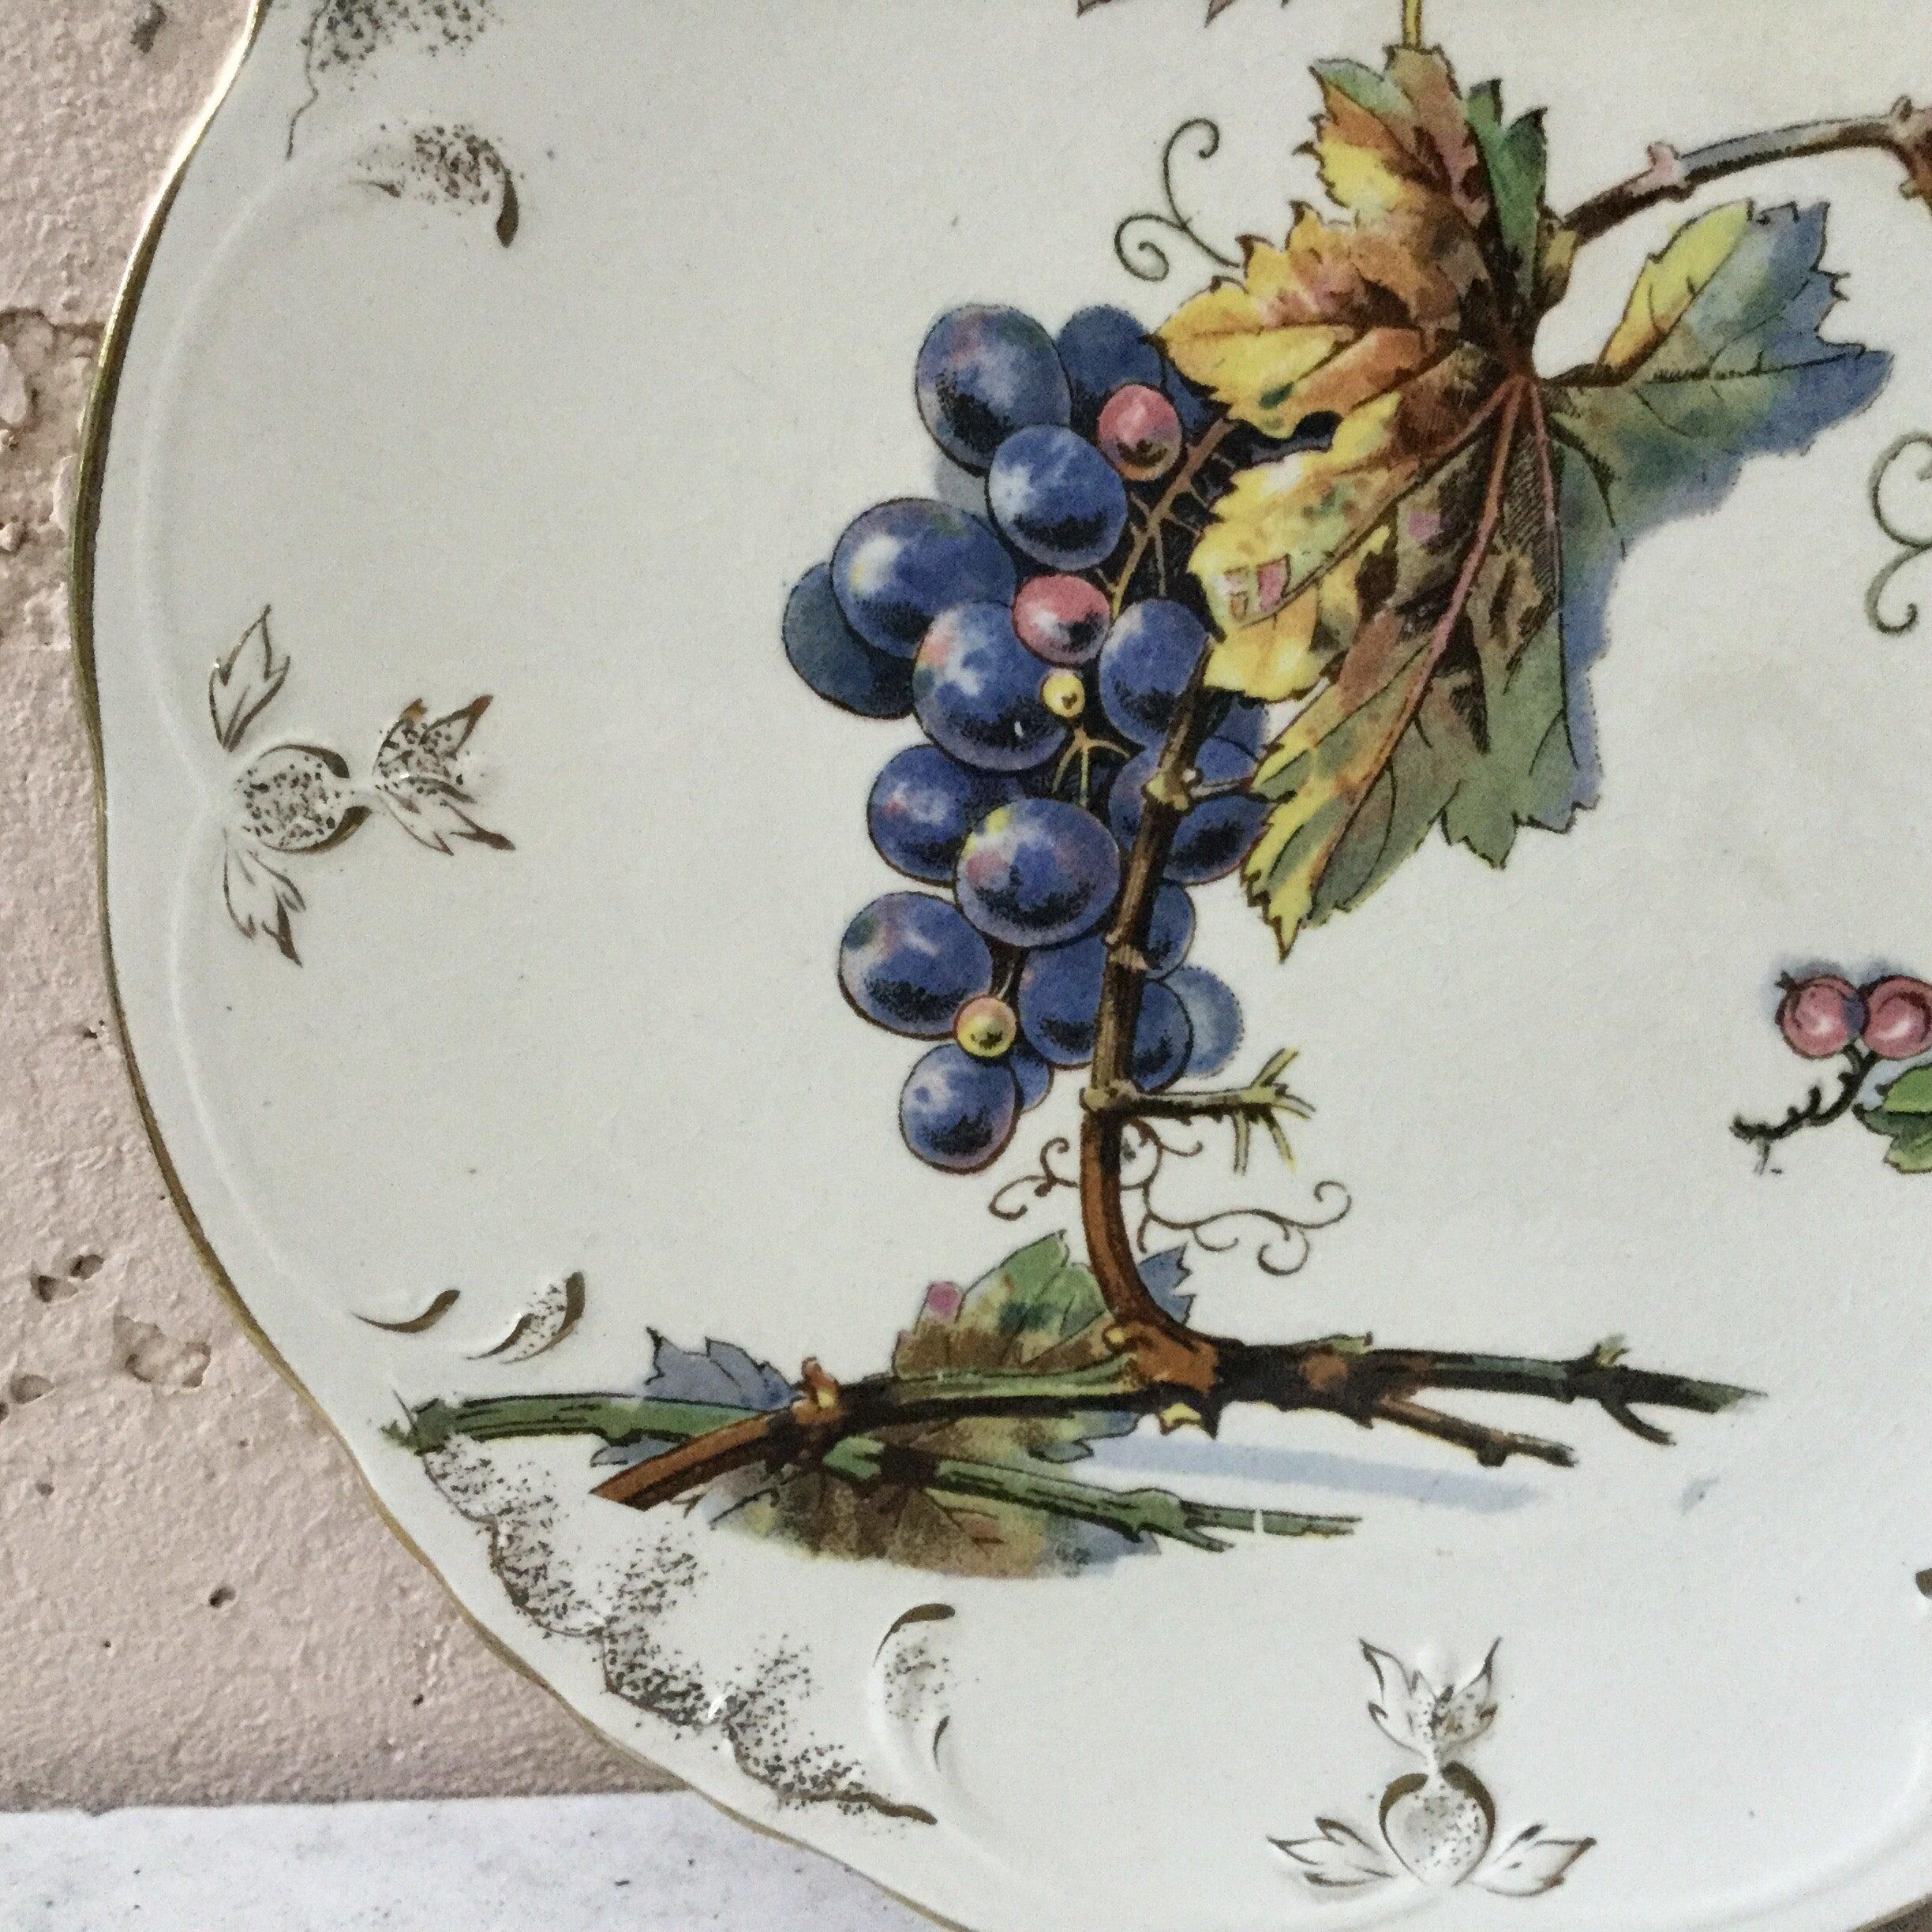 Rustic faience grapes plate signed Villeroy & Boch, circa 1900.